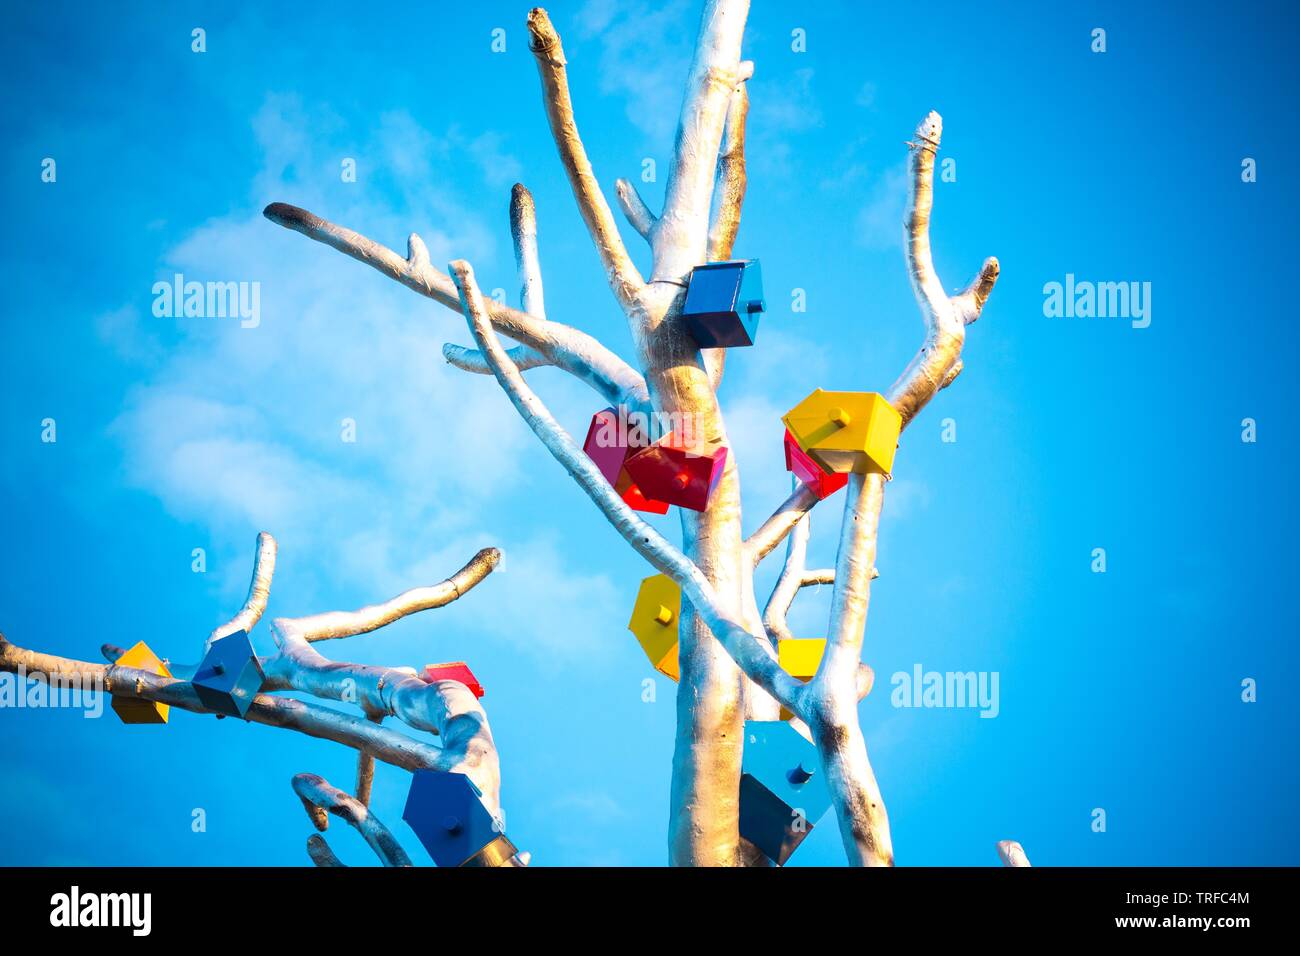 Feeders for birds are attached to a tree made of metal. The tree is against the blue and clear sky Stock Photo